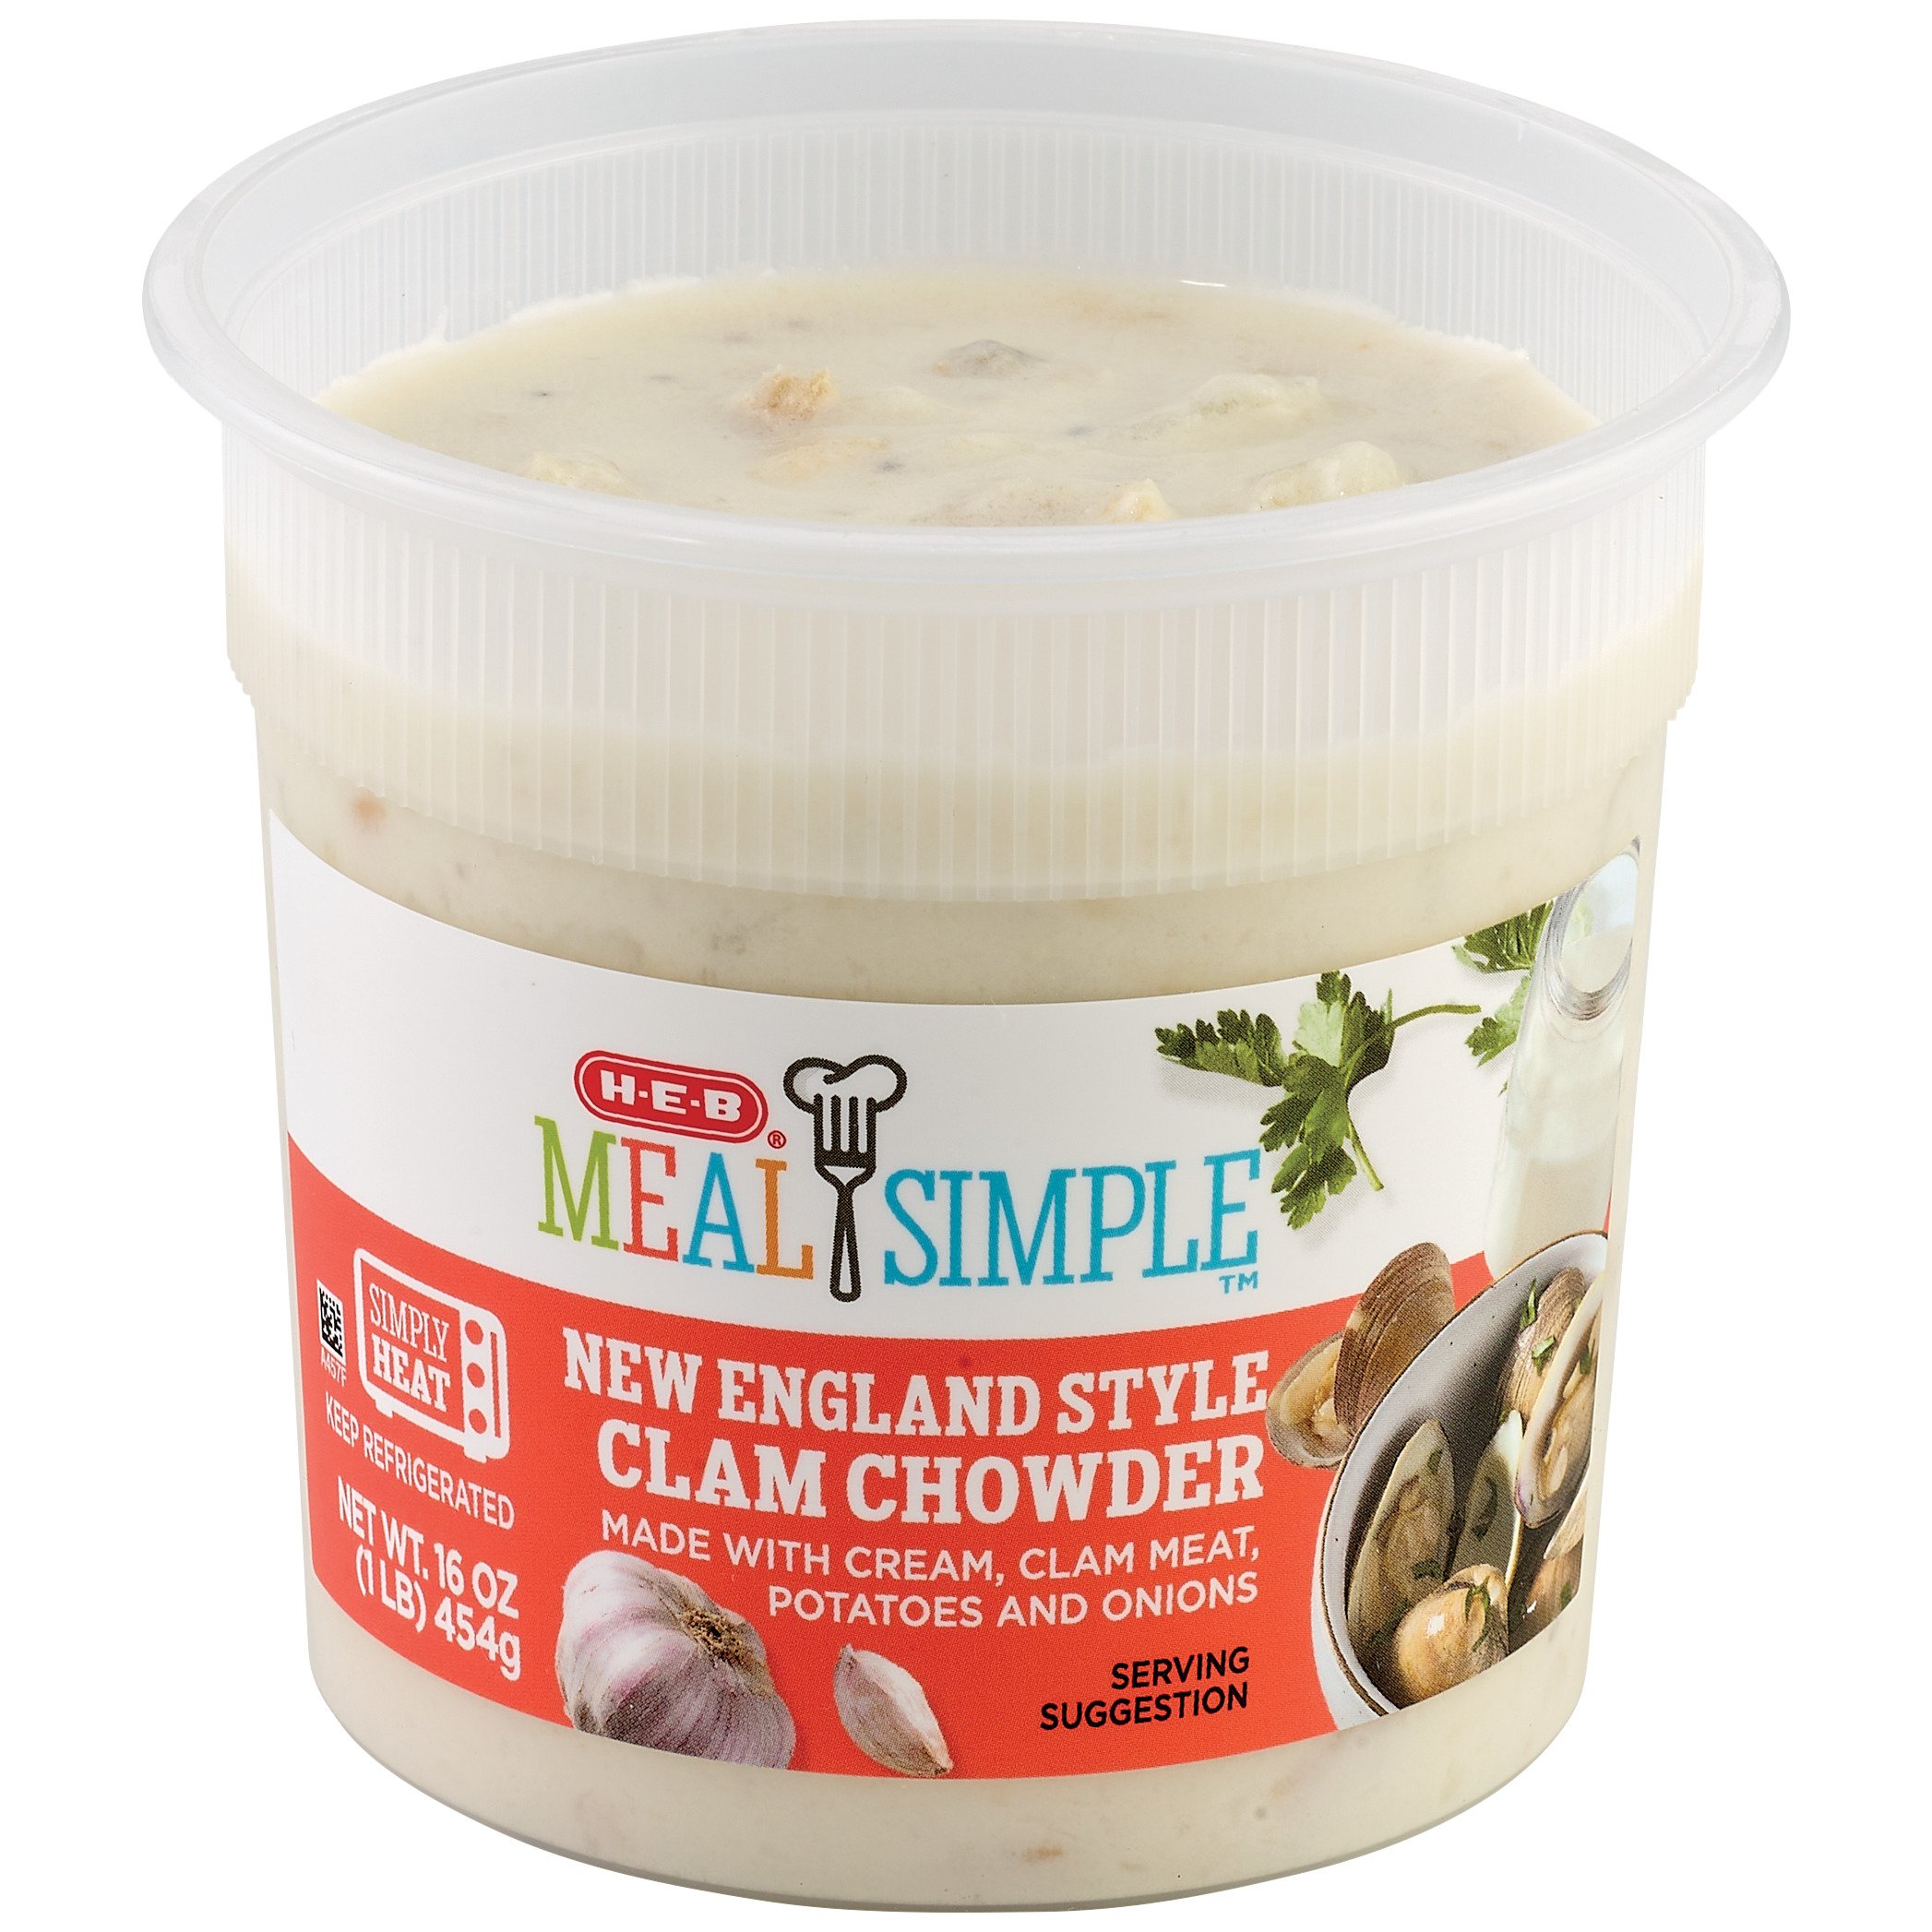 New England Clam Chowder - Handle the Heat